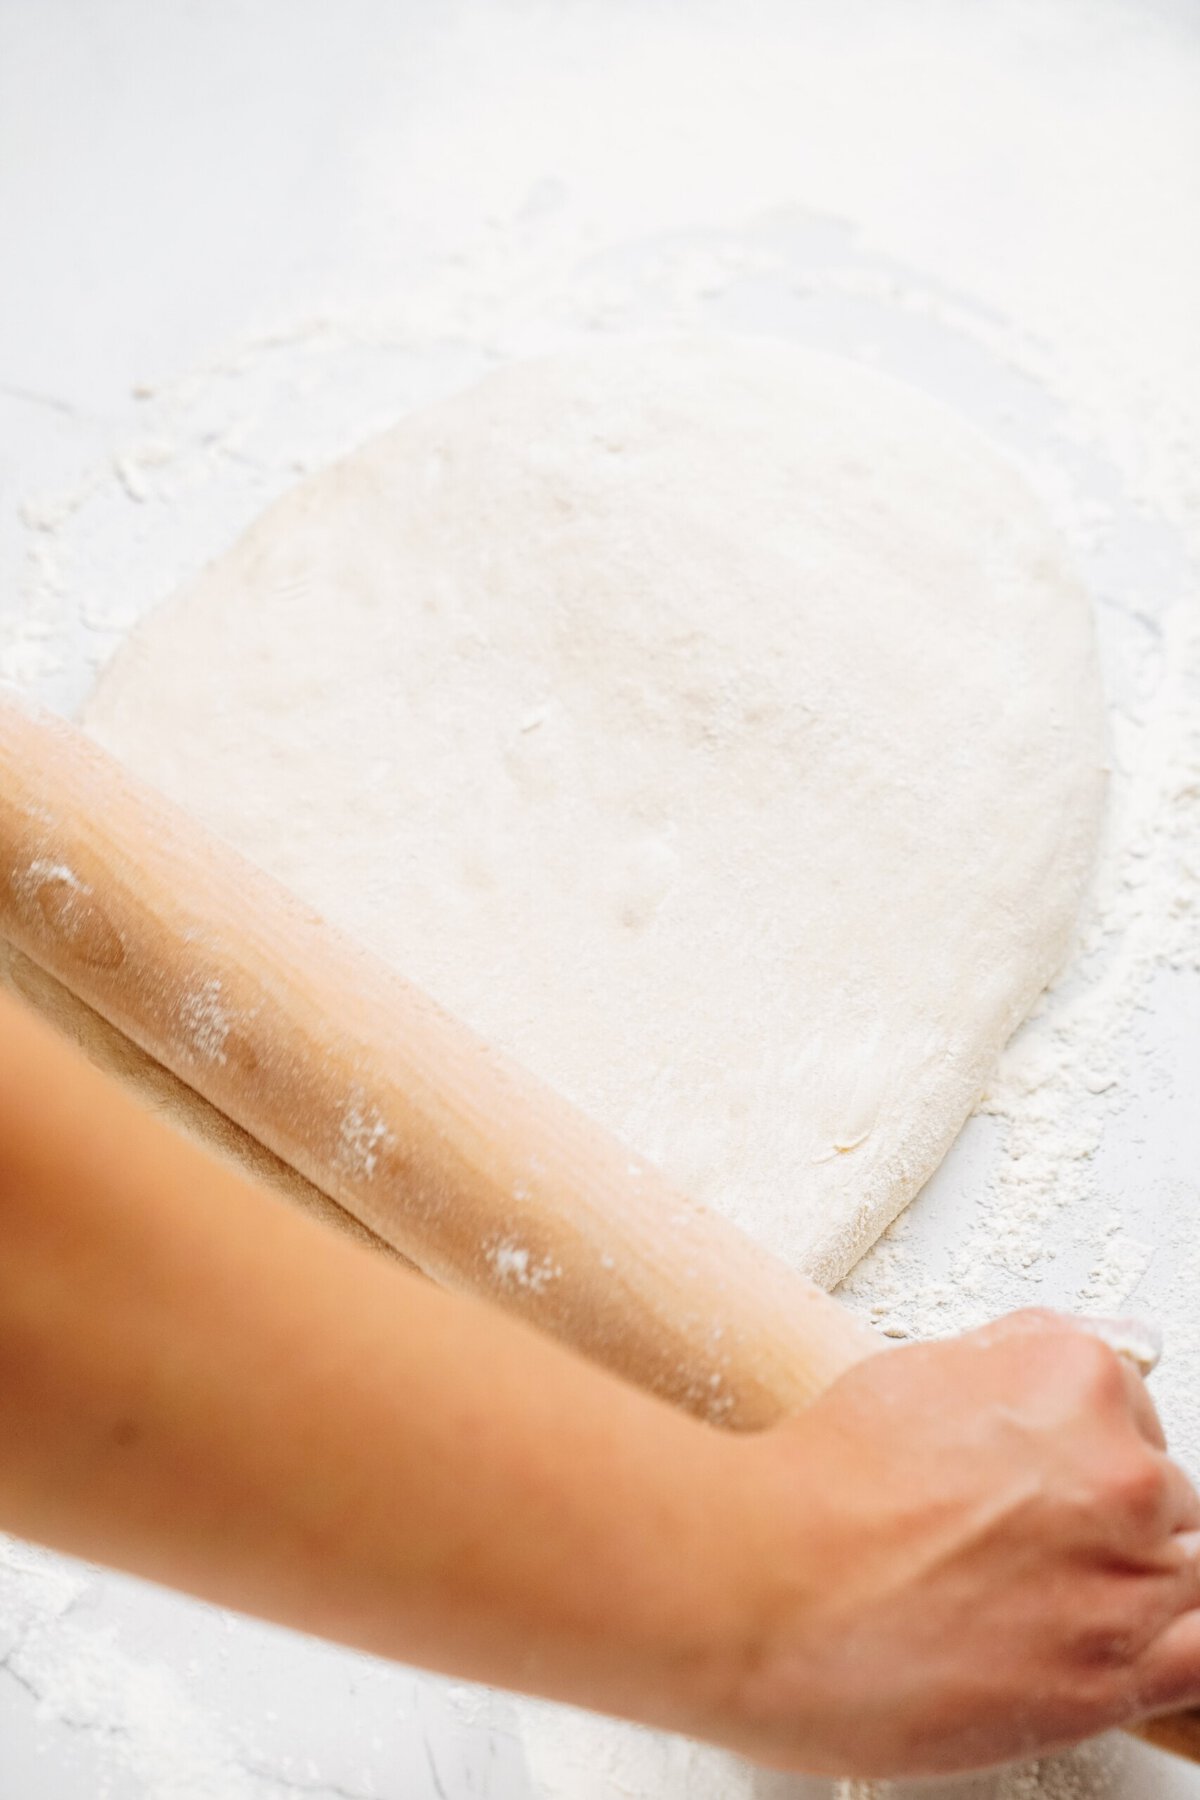 A hand uses a rolling pin to flatten dough on a floured surface, preparing it for delicious cinnamon rolls.